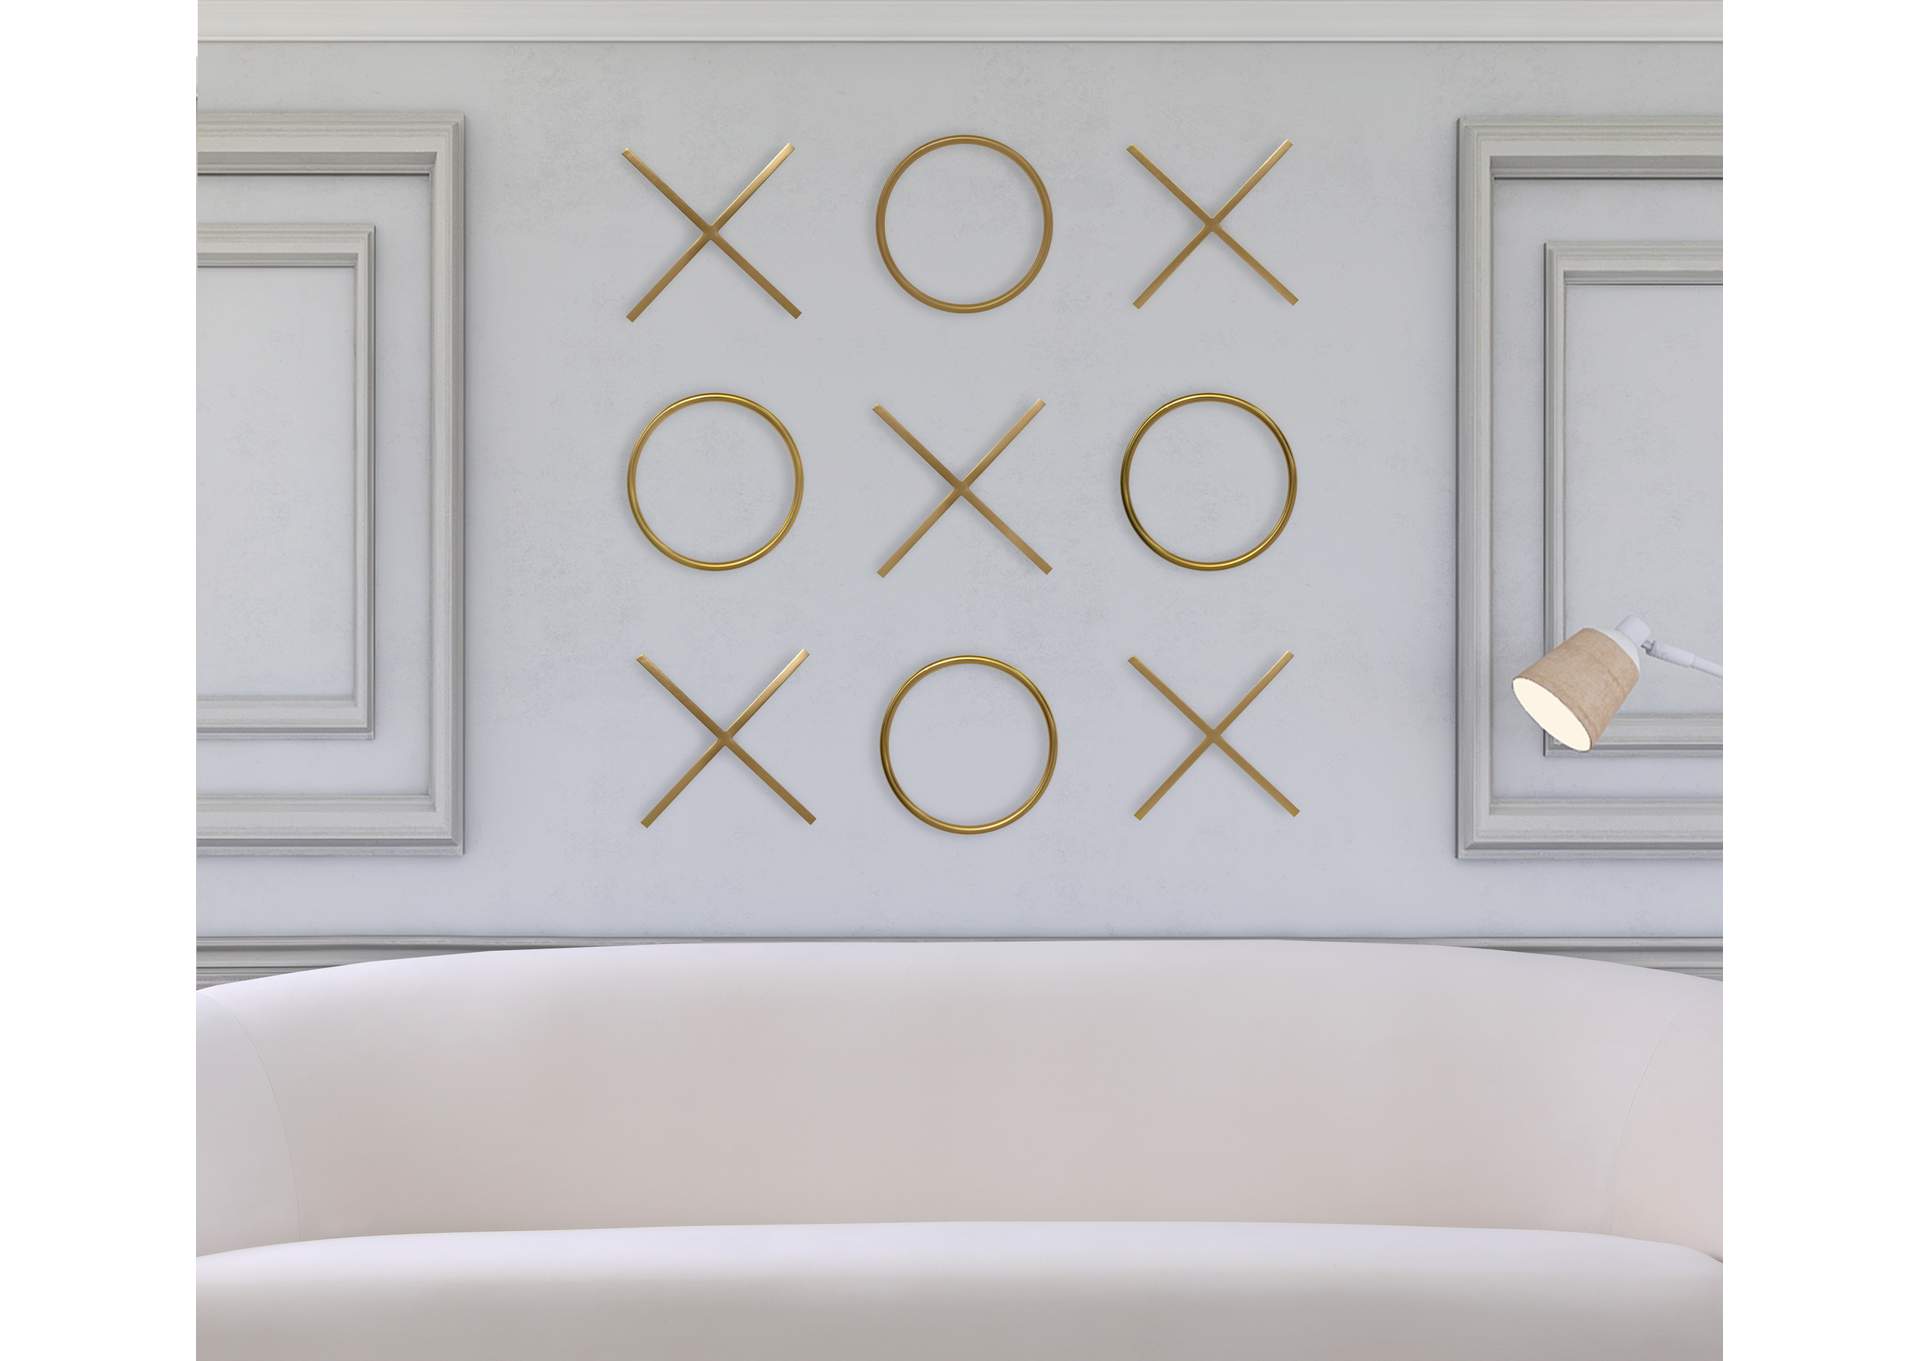 Xoxo Gold Stainless Steel Wall Decor,Meridian Furniture